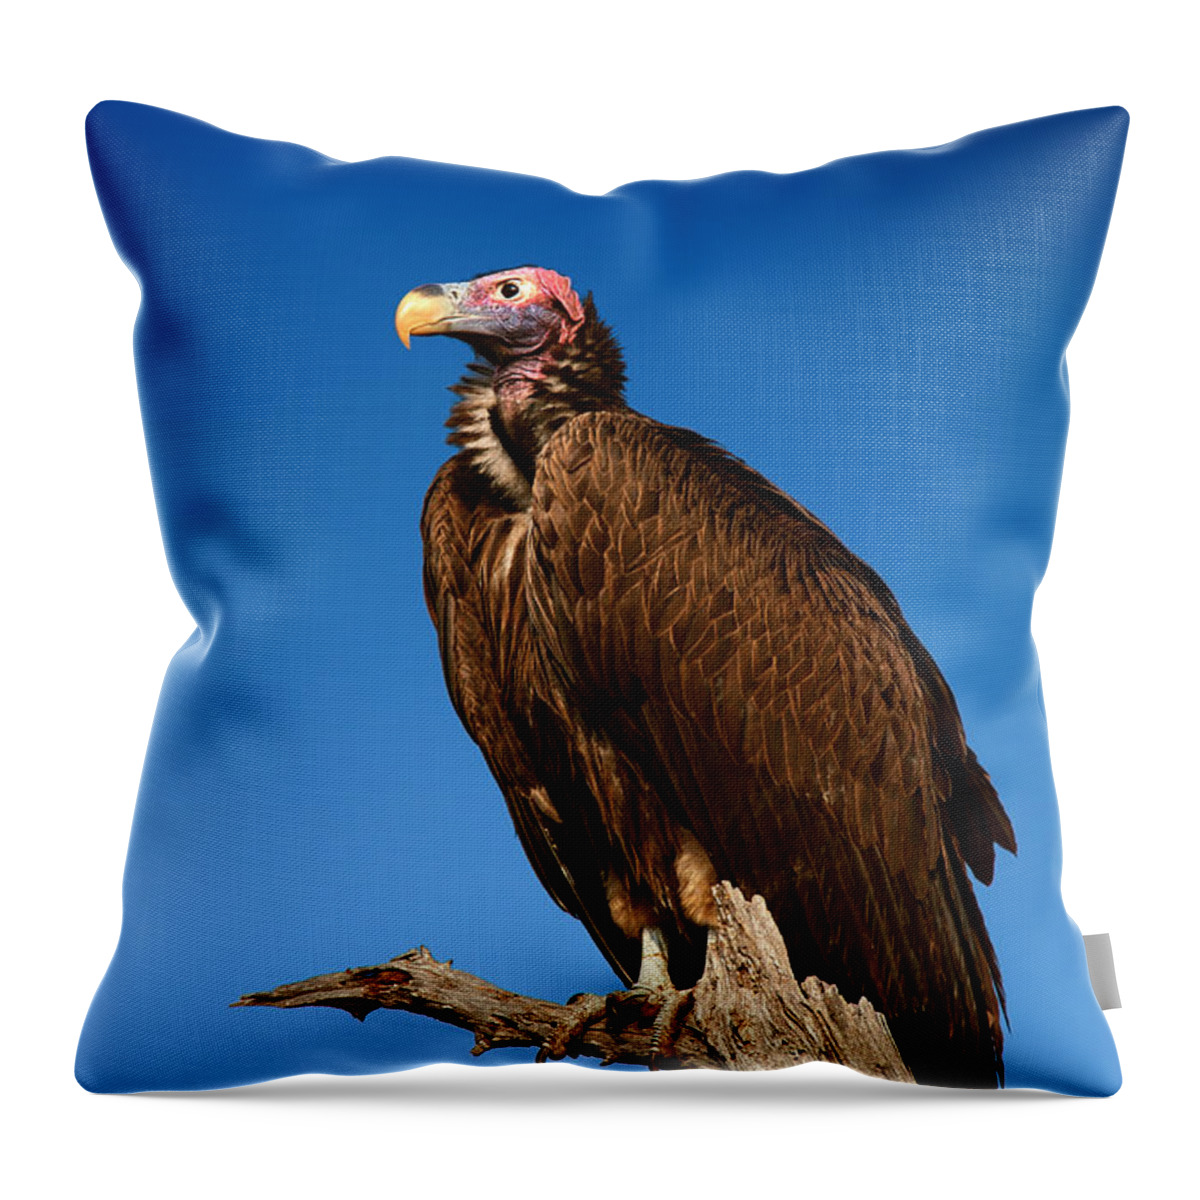 Vulture Throw Pillow featuring the photograph Lappetfaced Vulture against blue sky by Johan Swanepoel